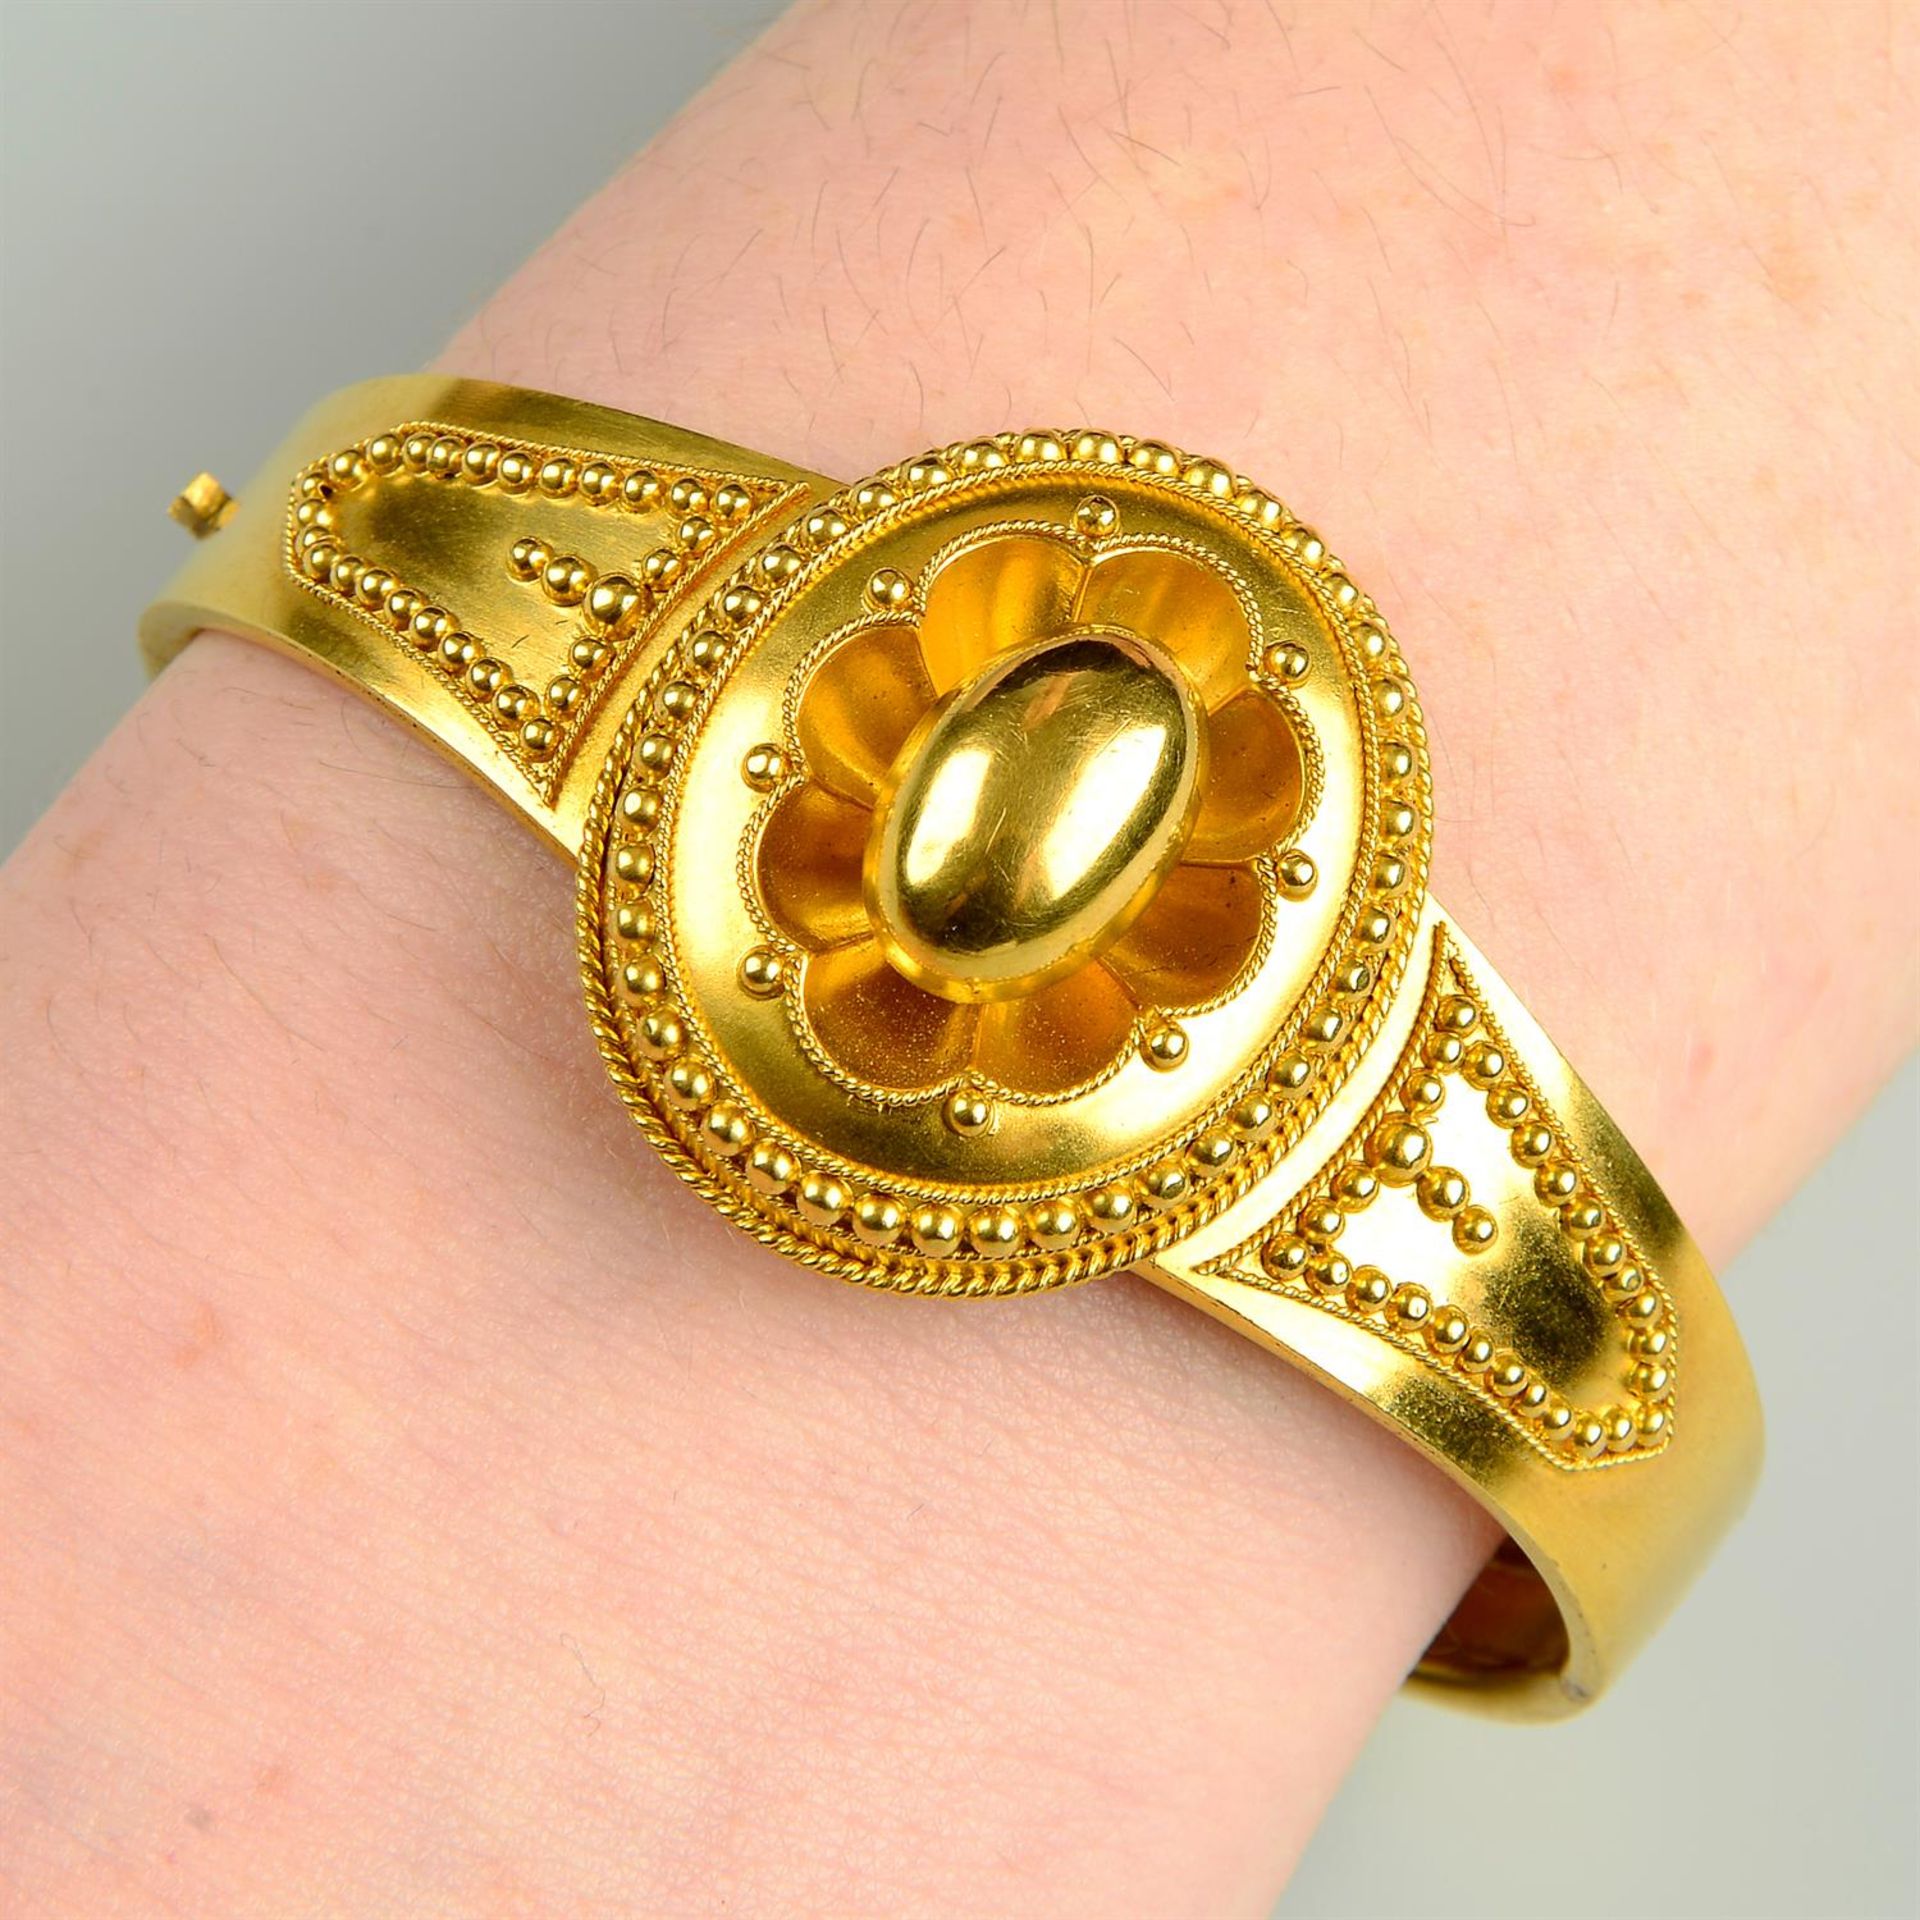 A late 19th century gold bead and rope-twist hinged bangle, with locket reverse.